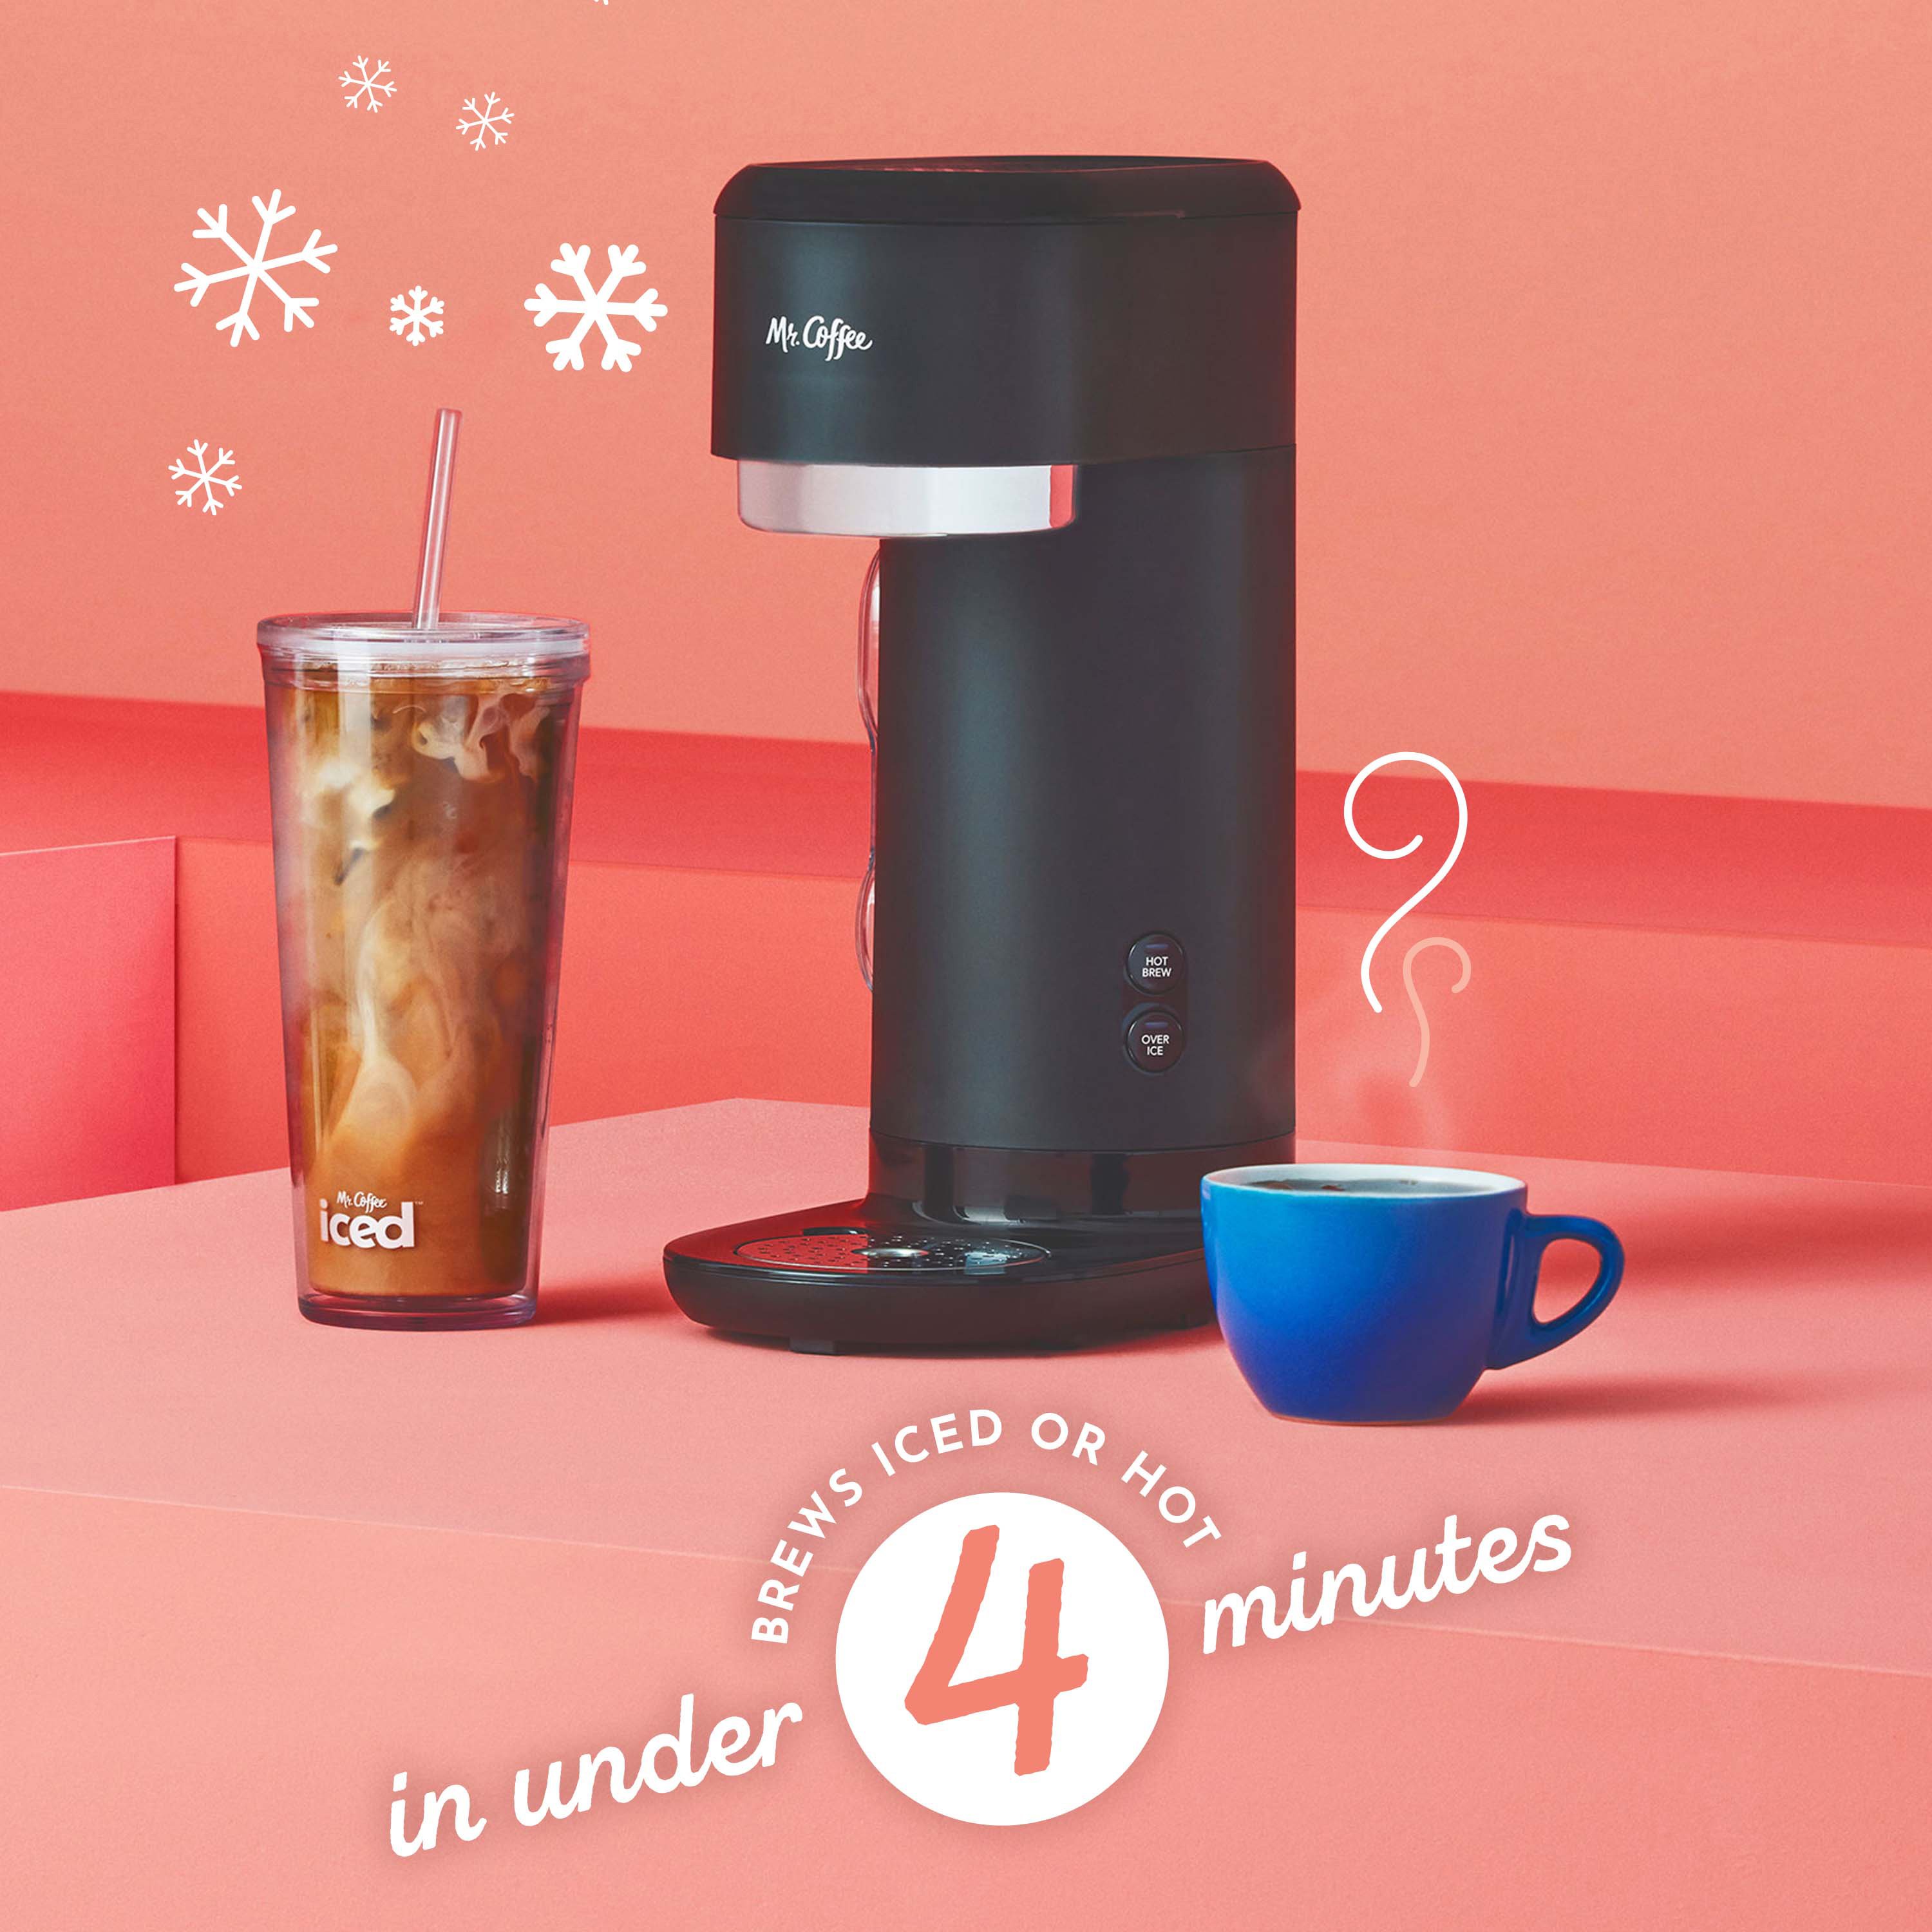 Mr. Coffee 4-in1 Single-Serve Latte, Iced, and Hot Coffee Maker